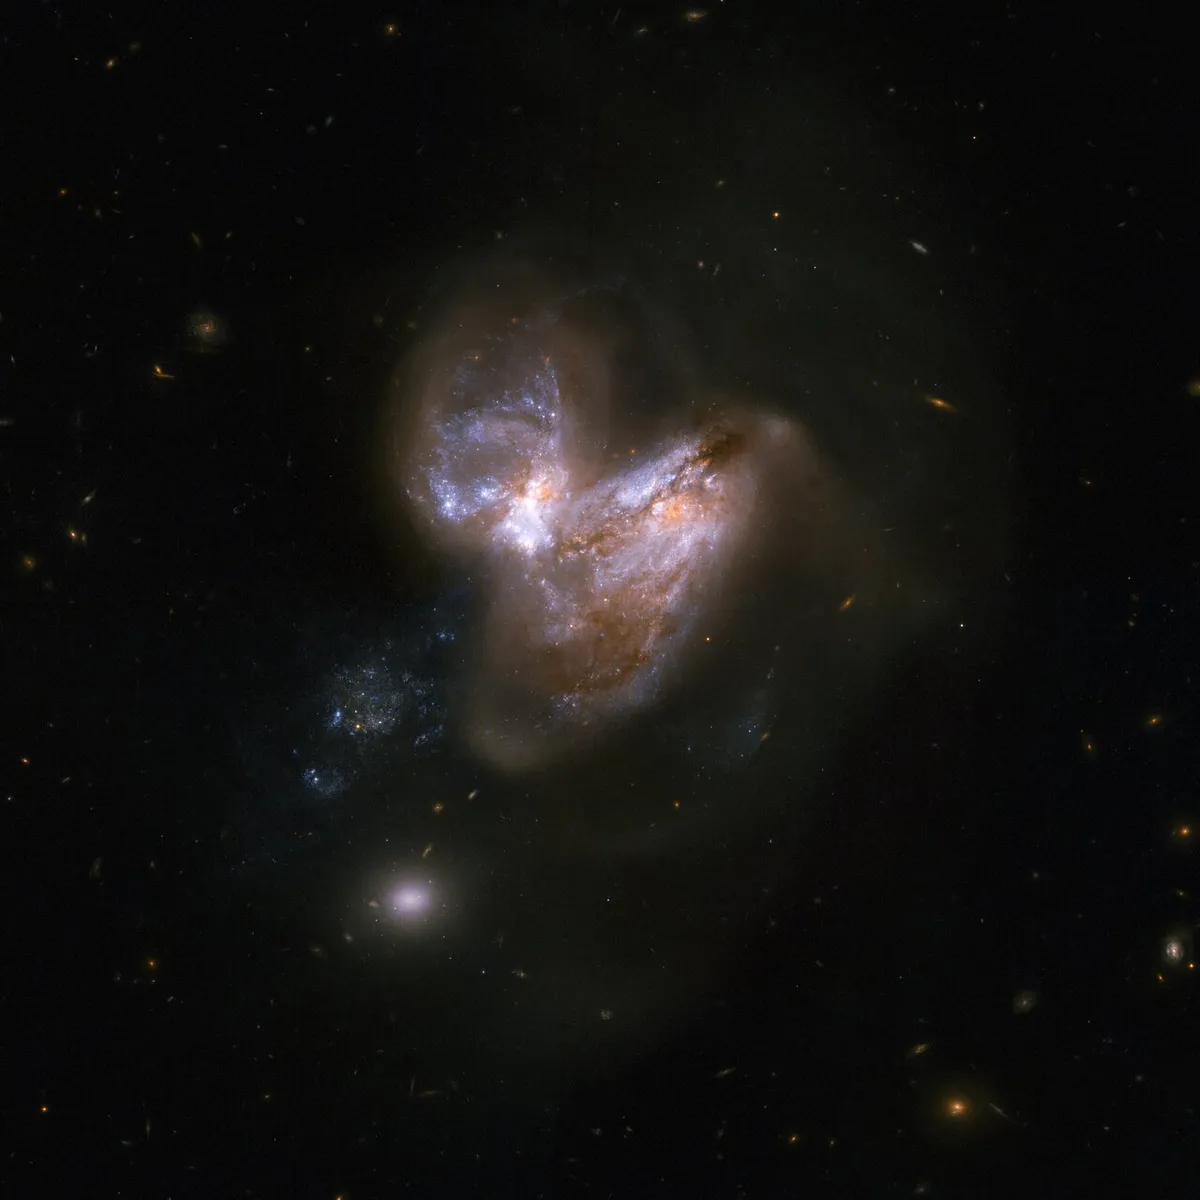 Galaxies IC 694 and NGC 3690 had a close encounter about 700 million years ago, causing the resulting merger to undergo an energetic burst of star formation. In the last fifteen years 6 supernovae have been observed in the outer fringes of the galaxy. Credit: NASA, ESA, the Hubble Heritage Team (STScI/AURA)-ESA/Hubble Collaboration and A. Evans (University of Virginia, Charlottesville/NRAO/Stony Brook University)